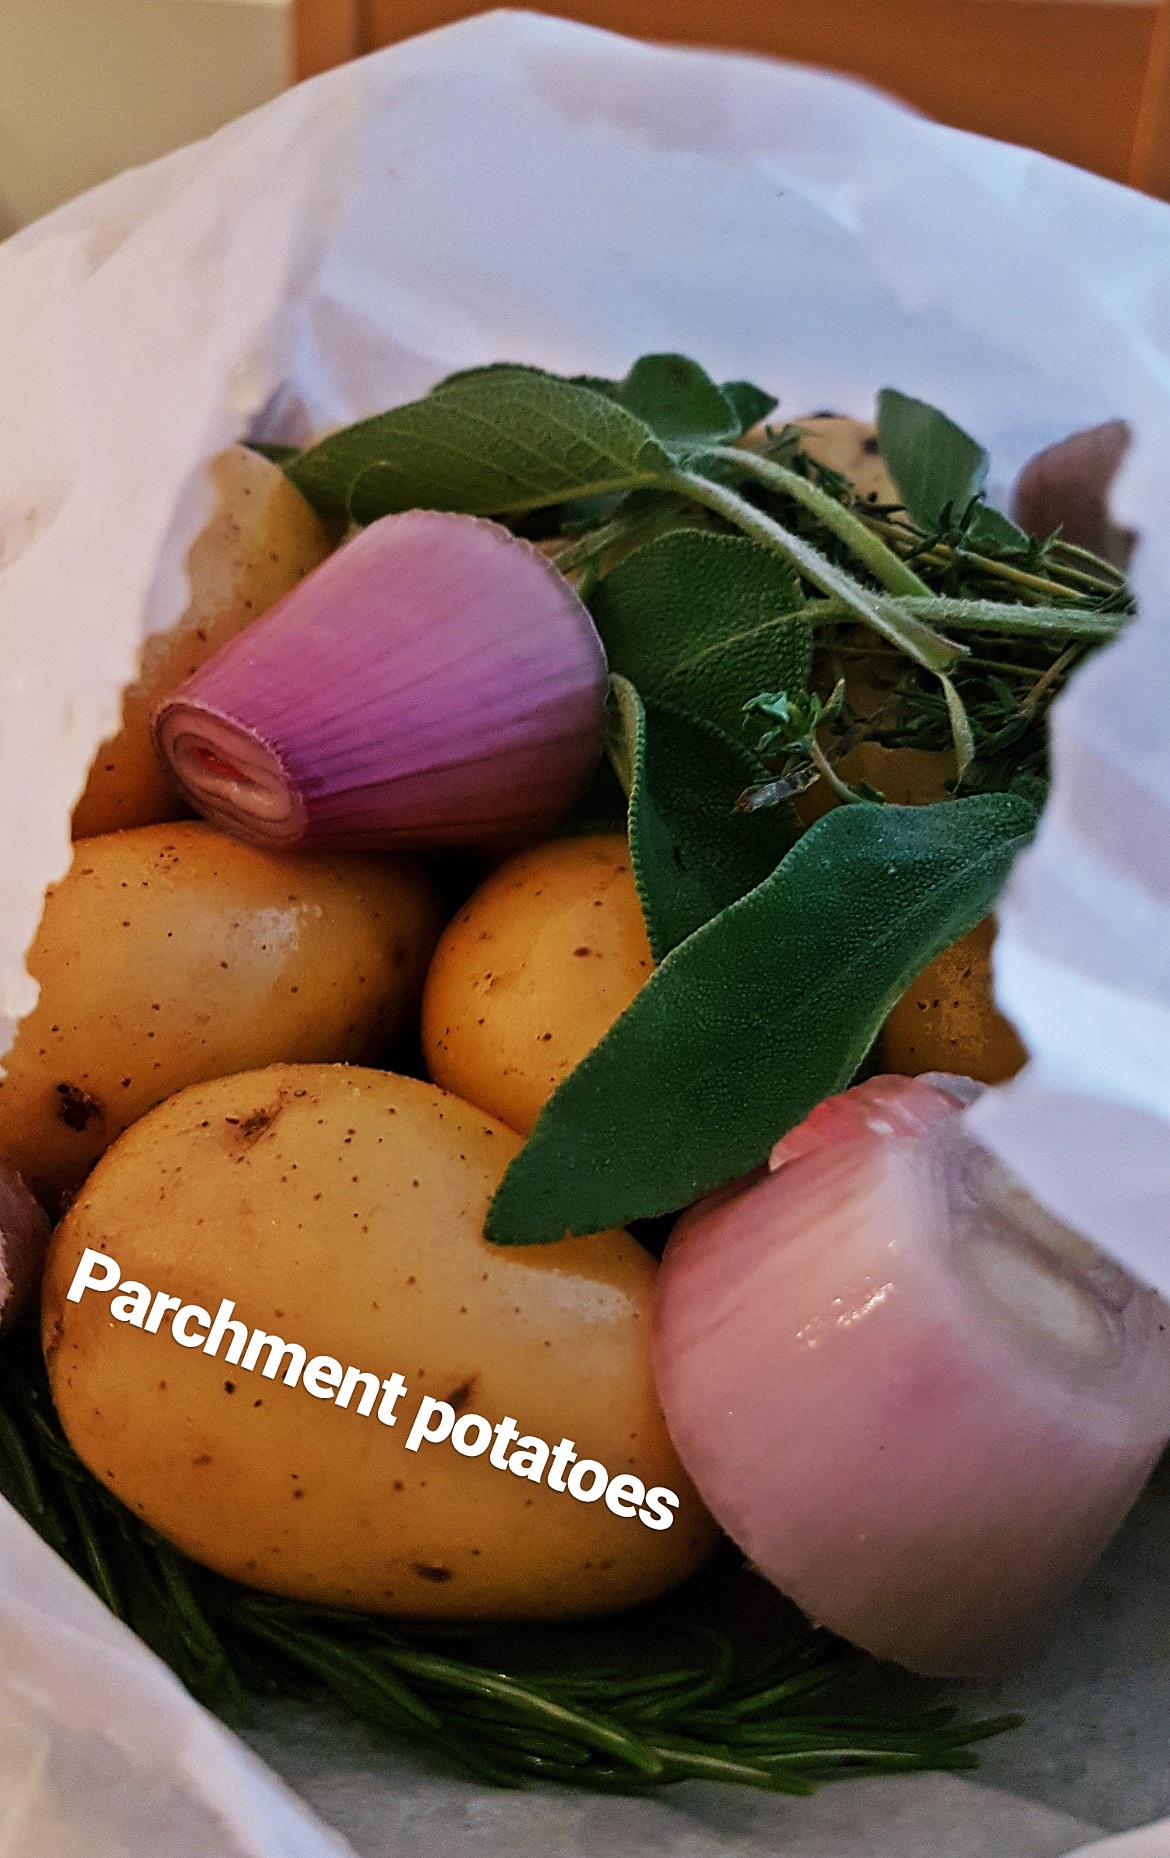 A pouch of parchment potatoes - Conqueror's Chateaubriand and Ye Olde Parchment Potatoes - Cooking Games Recipe by BeckyBecky Blogs